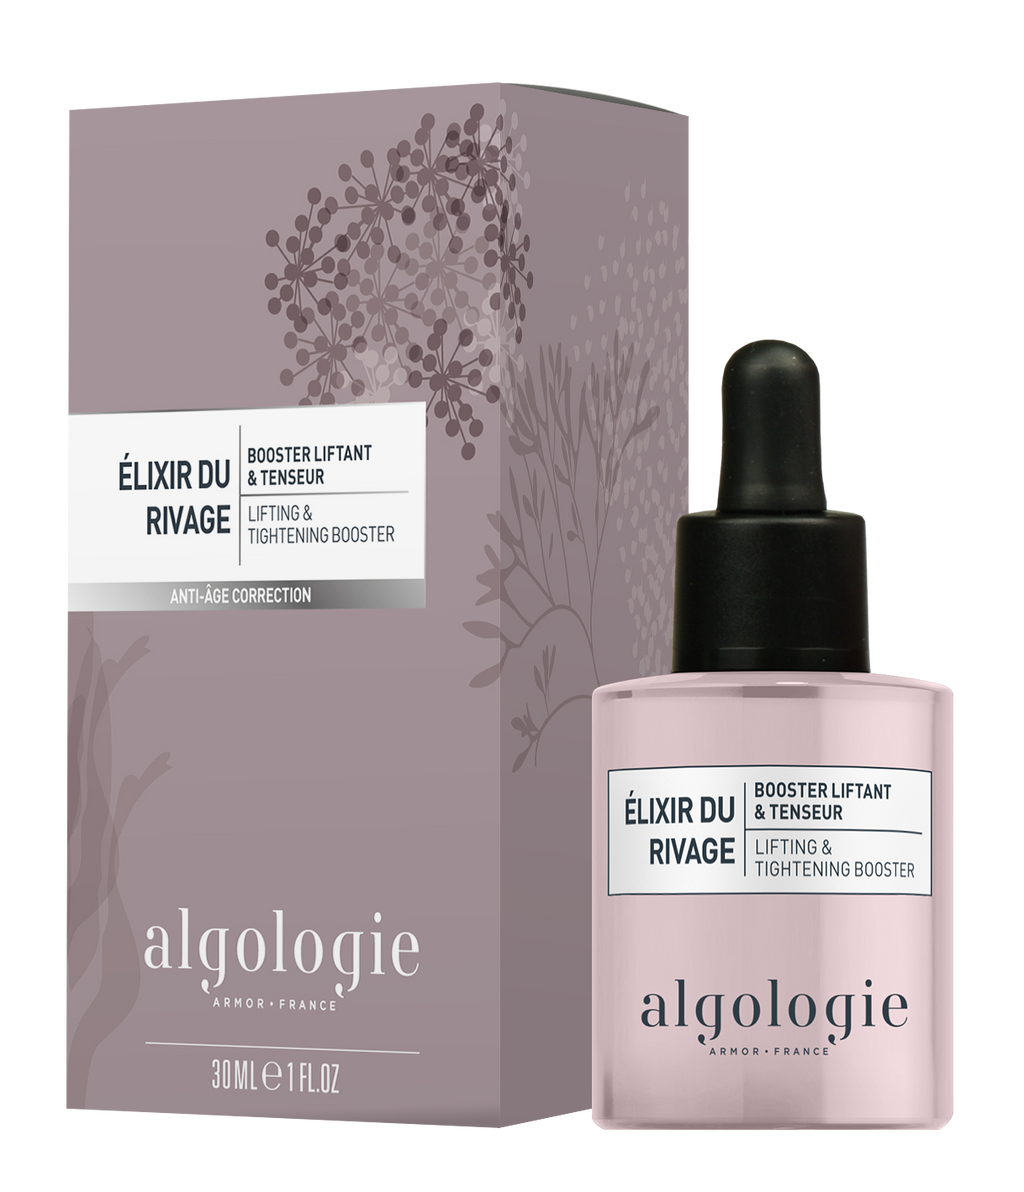 Algologie Rivage Lifting & Tightening Booster 30ml